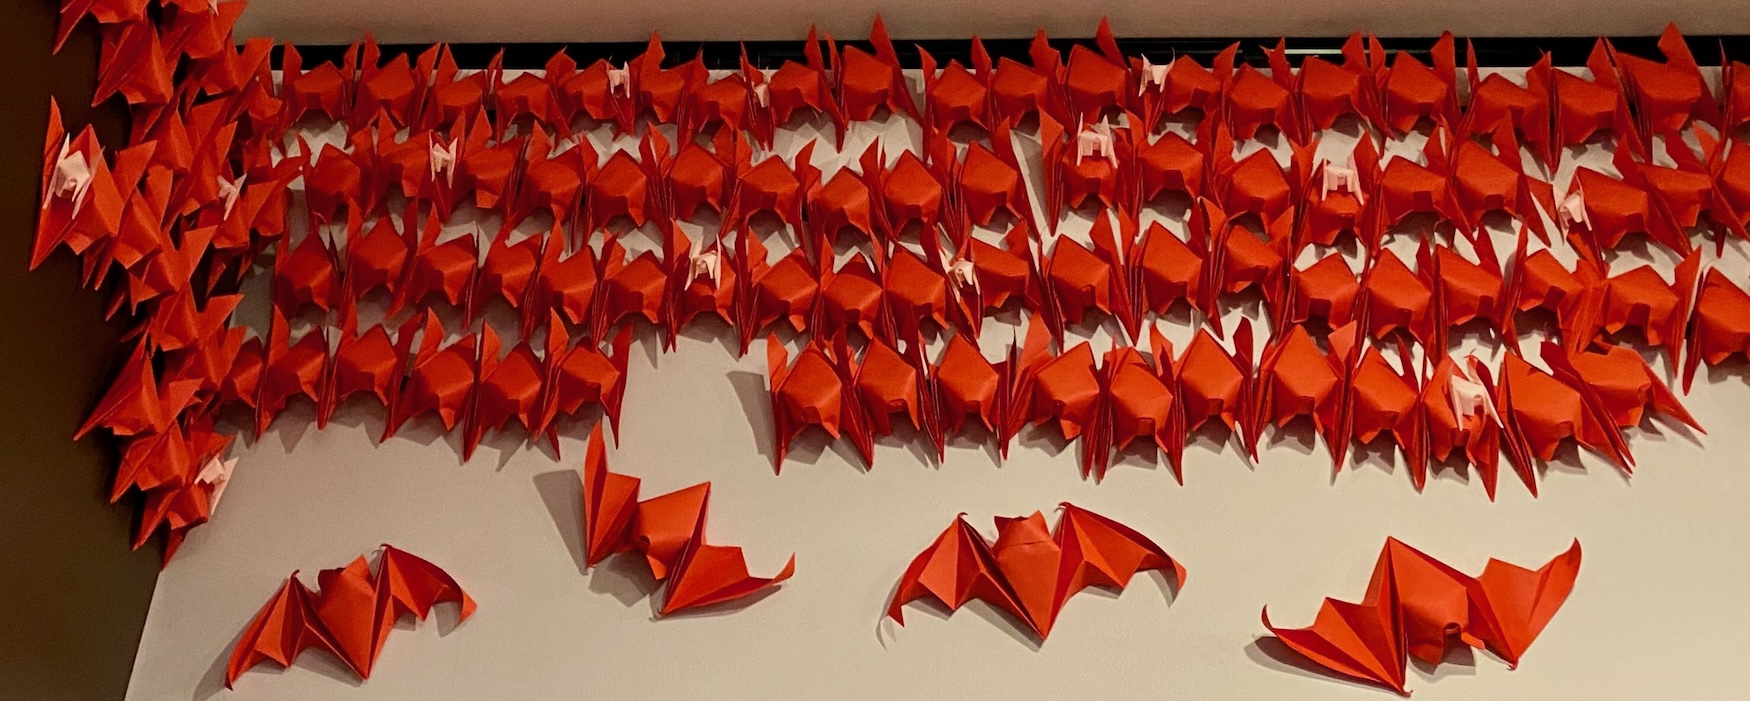 It's the weekend! Number 323, Red Paper Bats by Michael G. LaFosse in an Exhibit at the Peabody Essex Museum in Salem, MA